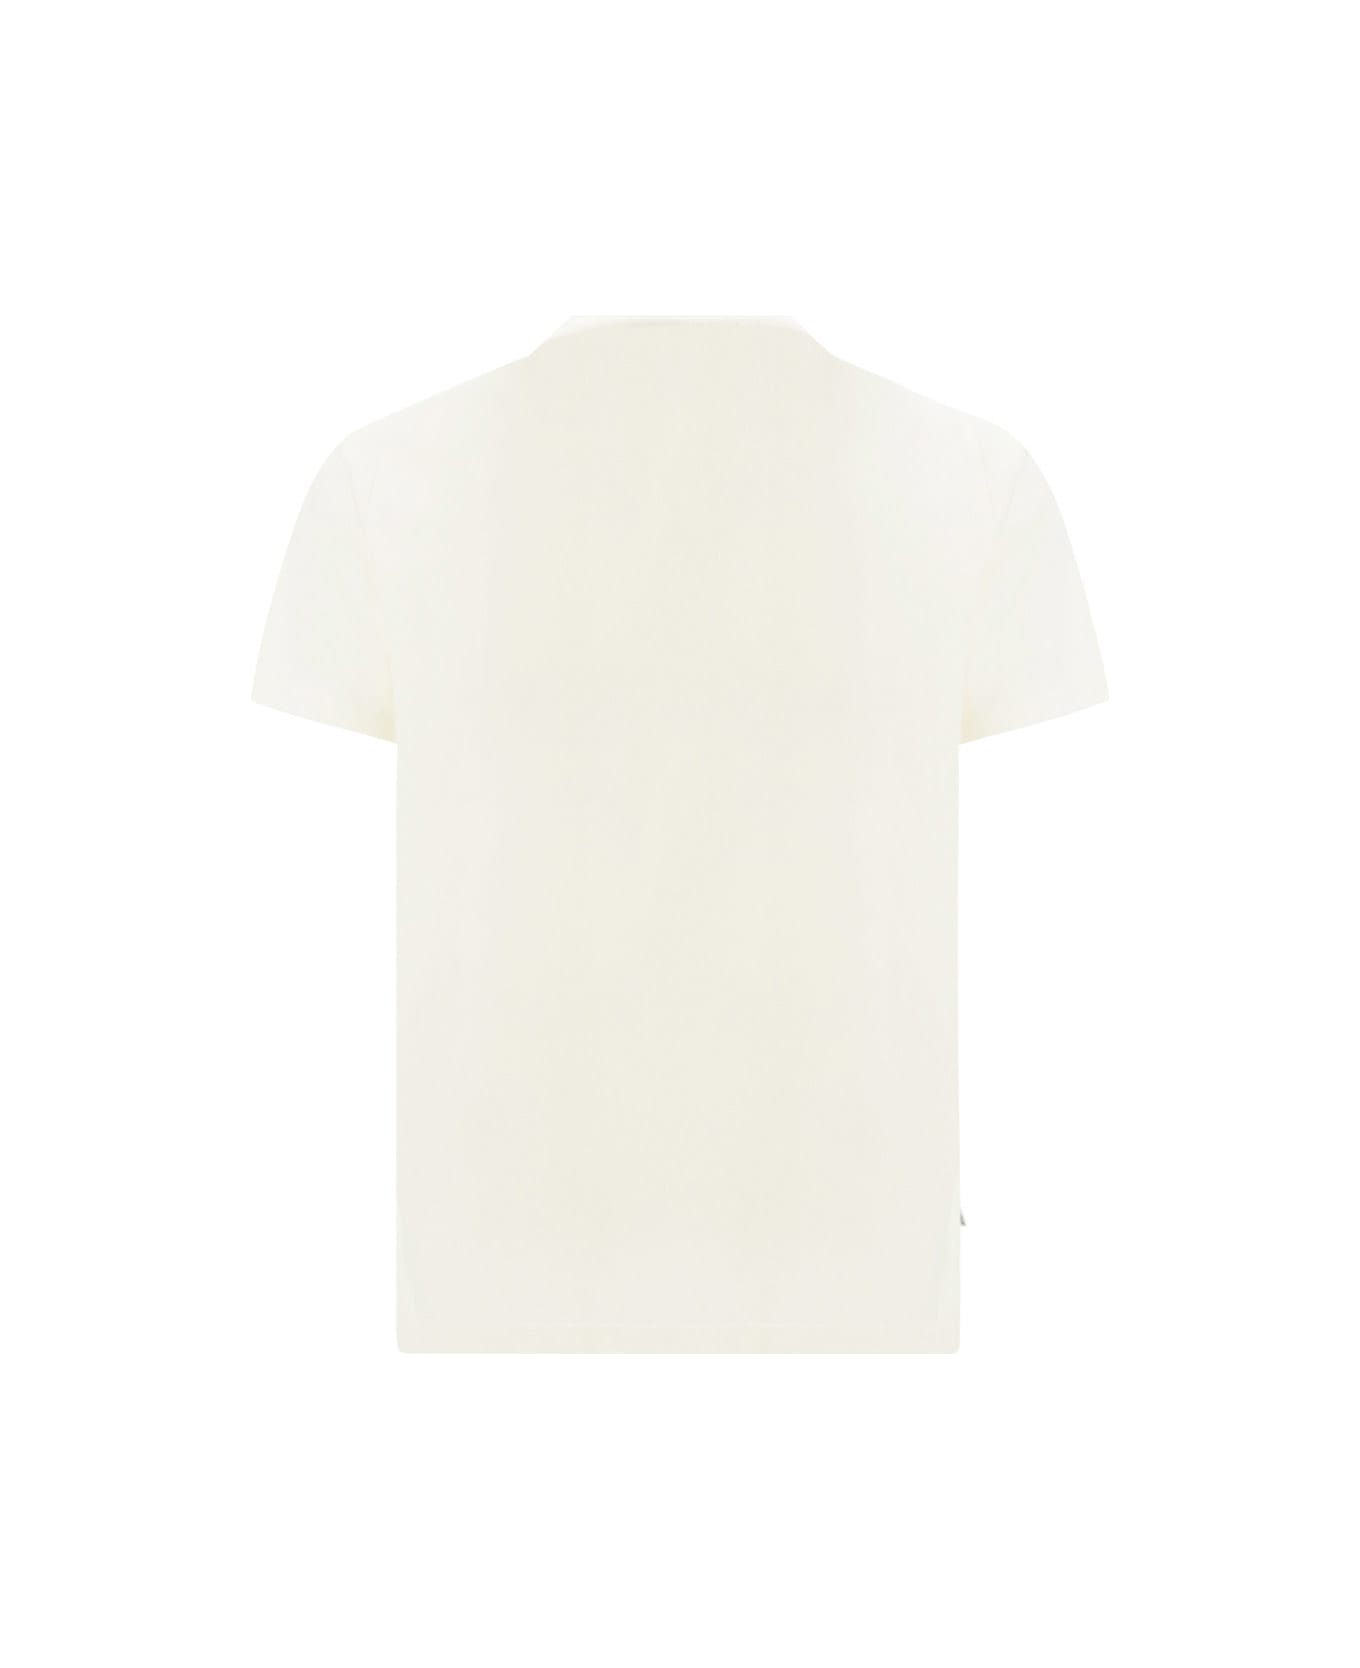 Autry Iconic Action T-shirt - White